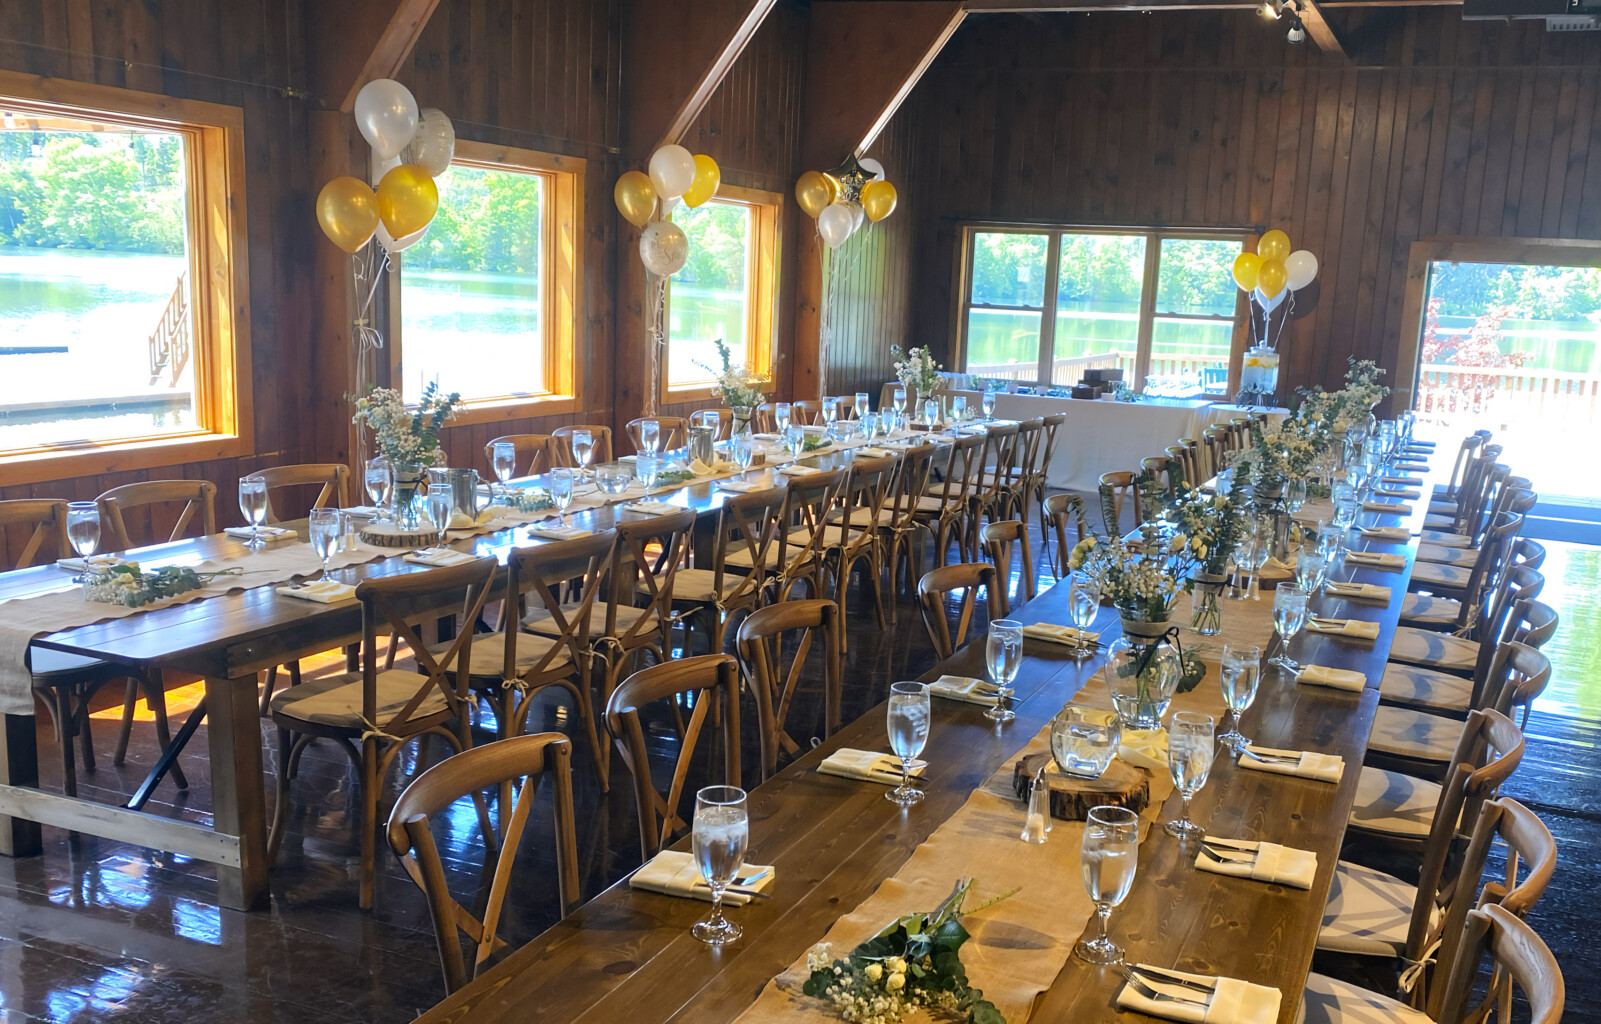 Boathouse set up for special event with tables in a row.